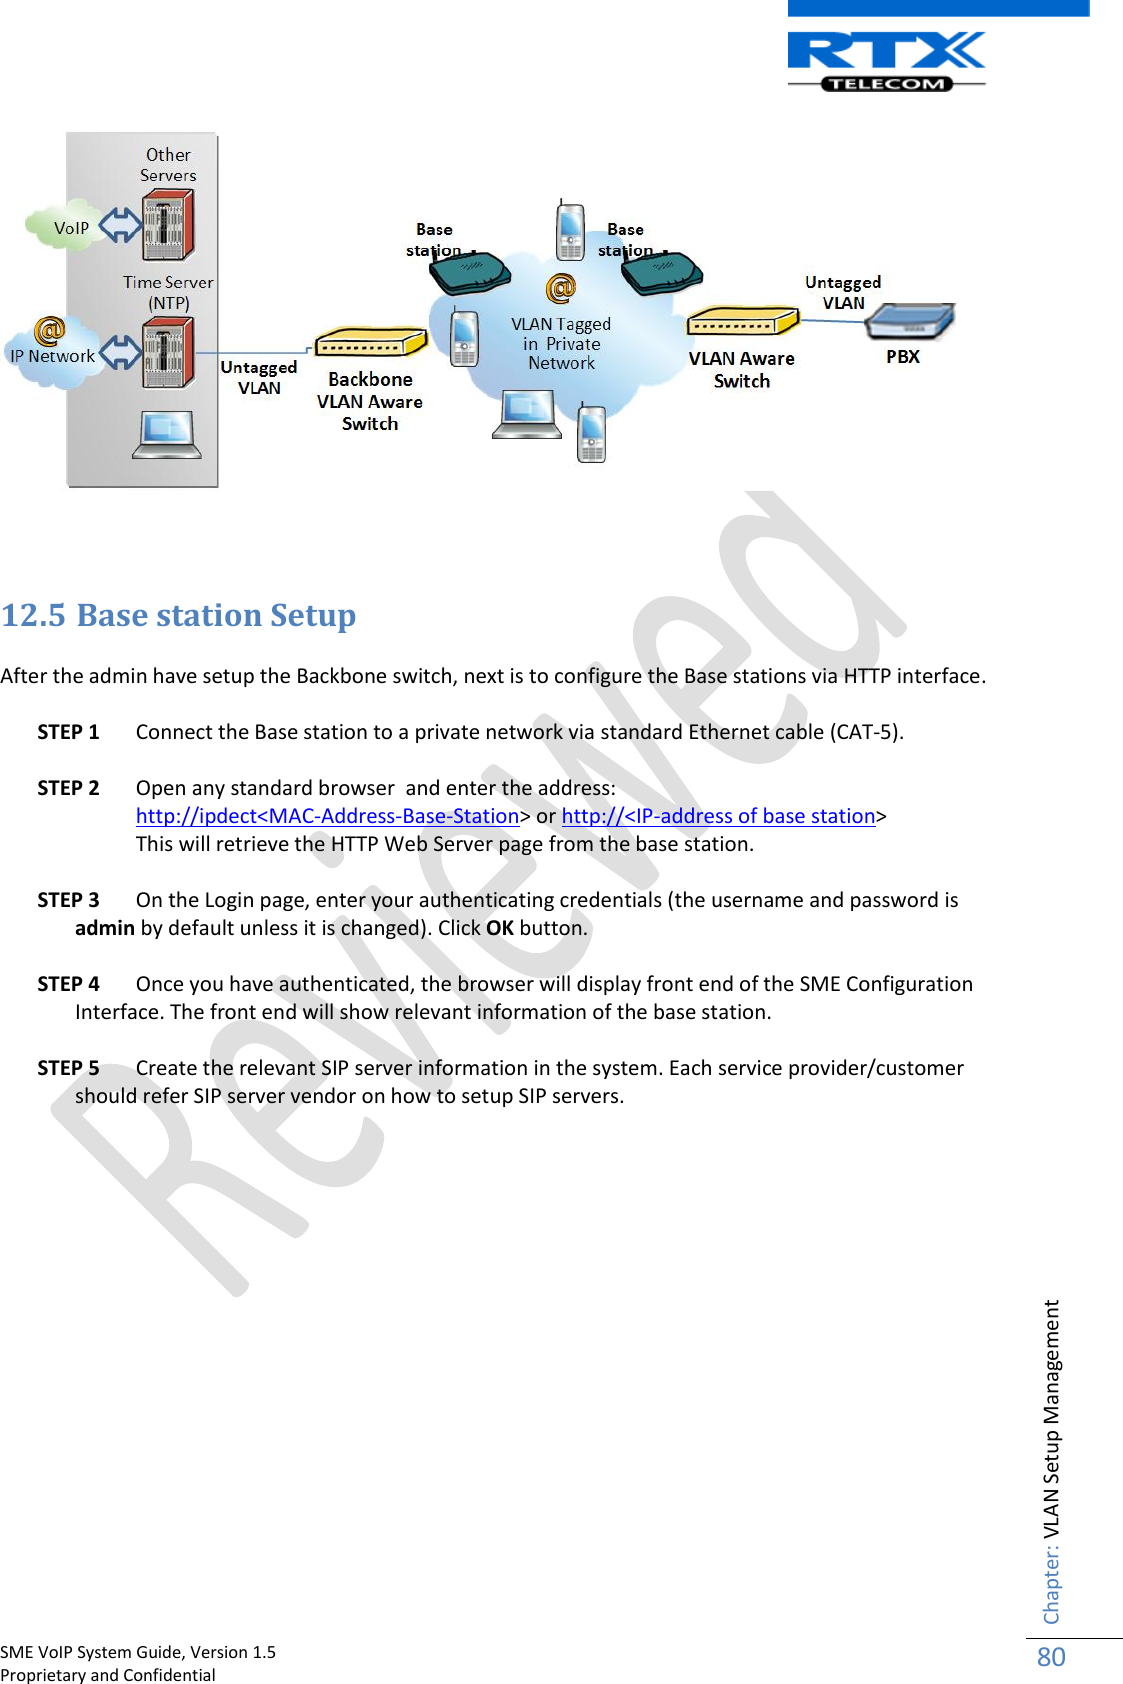    SME VoIP System Guide, Version 1.5                                                                                                                                                          Proprietary and Confidential    Chapter: VLAN Setup Management 80      12.5 Base station Setup   After the admin have setup the Backbone switch, next is to configure the Base stations via HTTP interface.   STEP 1 Connect the Base station to a private network via standard Ethernet cable (CAT-5).   STEP 2 Open any standard browser  and enter the address:  http://ipdect&lt;MAC-Address-Base-Station&gt; or http://&lt;IP-address of base station&gt; This will retrieve the HTTP Web Server page from the base station.  STEP 3 On the Login page, enter your authenticating credentials (the username and password is admin by default unless it is changed). Click OK button.  STEP 4 Once you have authenticated, the browser will display front end of the SME Configuration Interface. The front end will show relevant information of the base station.  STEP 5 Create the relevant SIP server information in the system. Each service provider/customer should refer SIP server vendor on how to setup SIP servers.                 